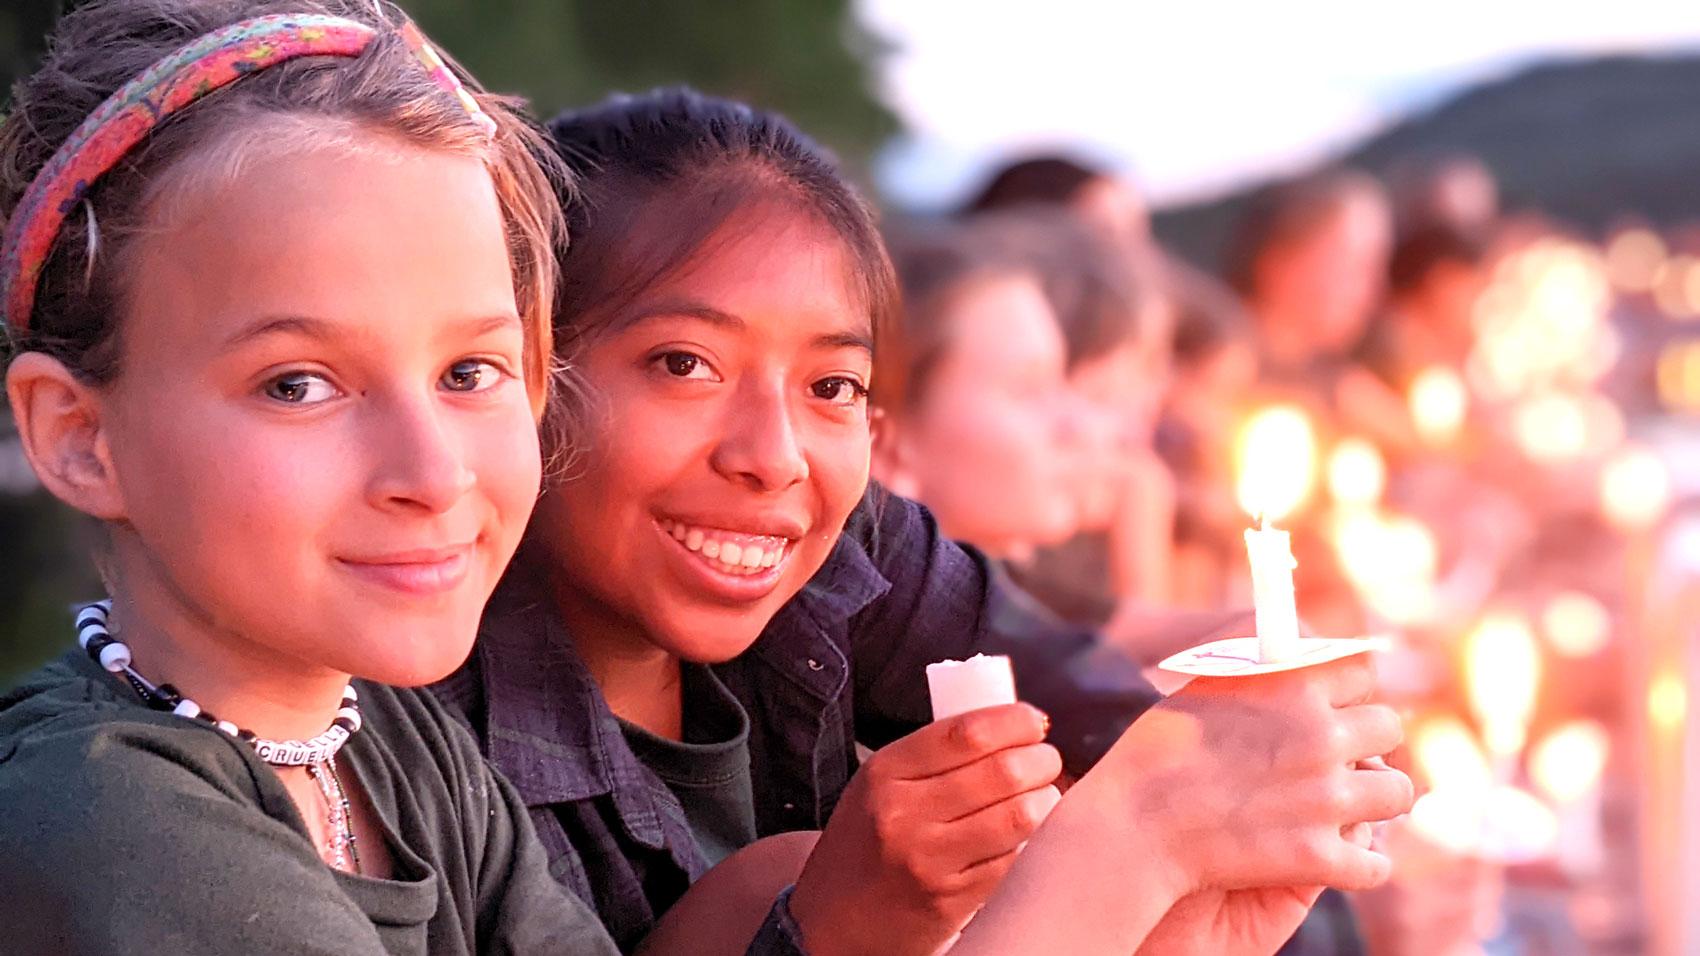 Two Campers with Candles Smiling